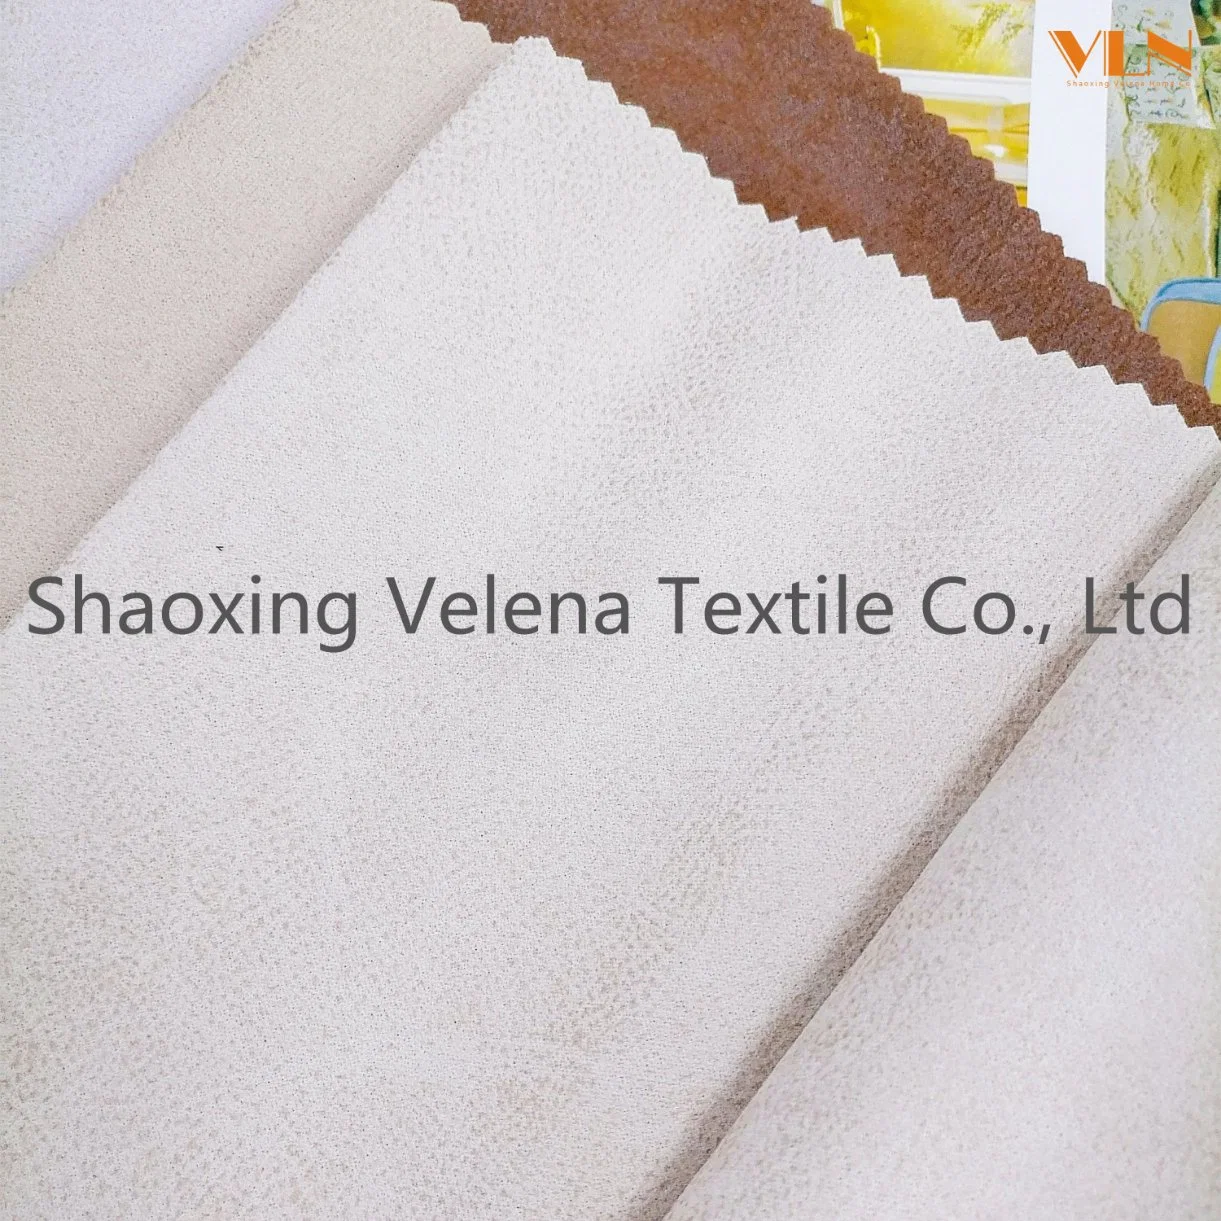 Original Factory Technology Leather Suede Fabric Dyeing with Bronzing Upholstery Furniture Sofa Textile Fabric